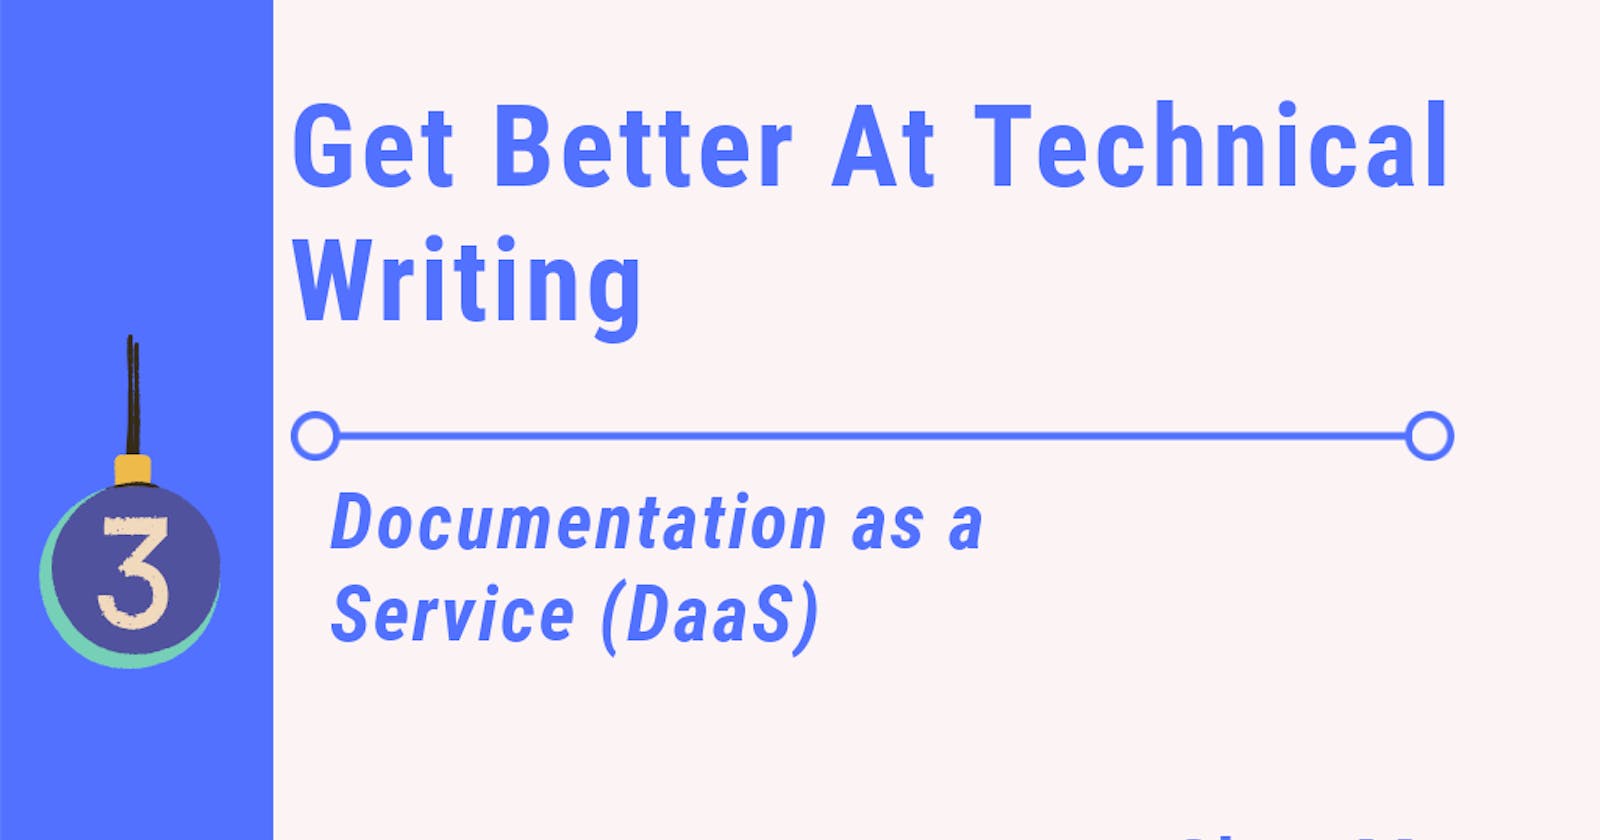 Get Better At Technical Writing 3: Documentation as a Service (DaaS)